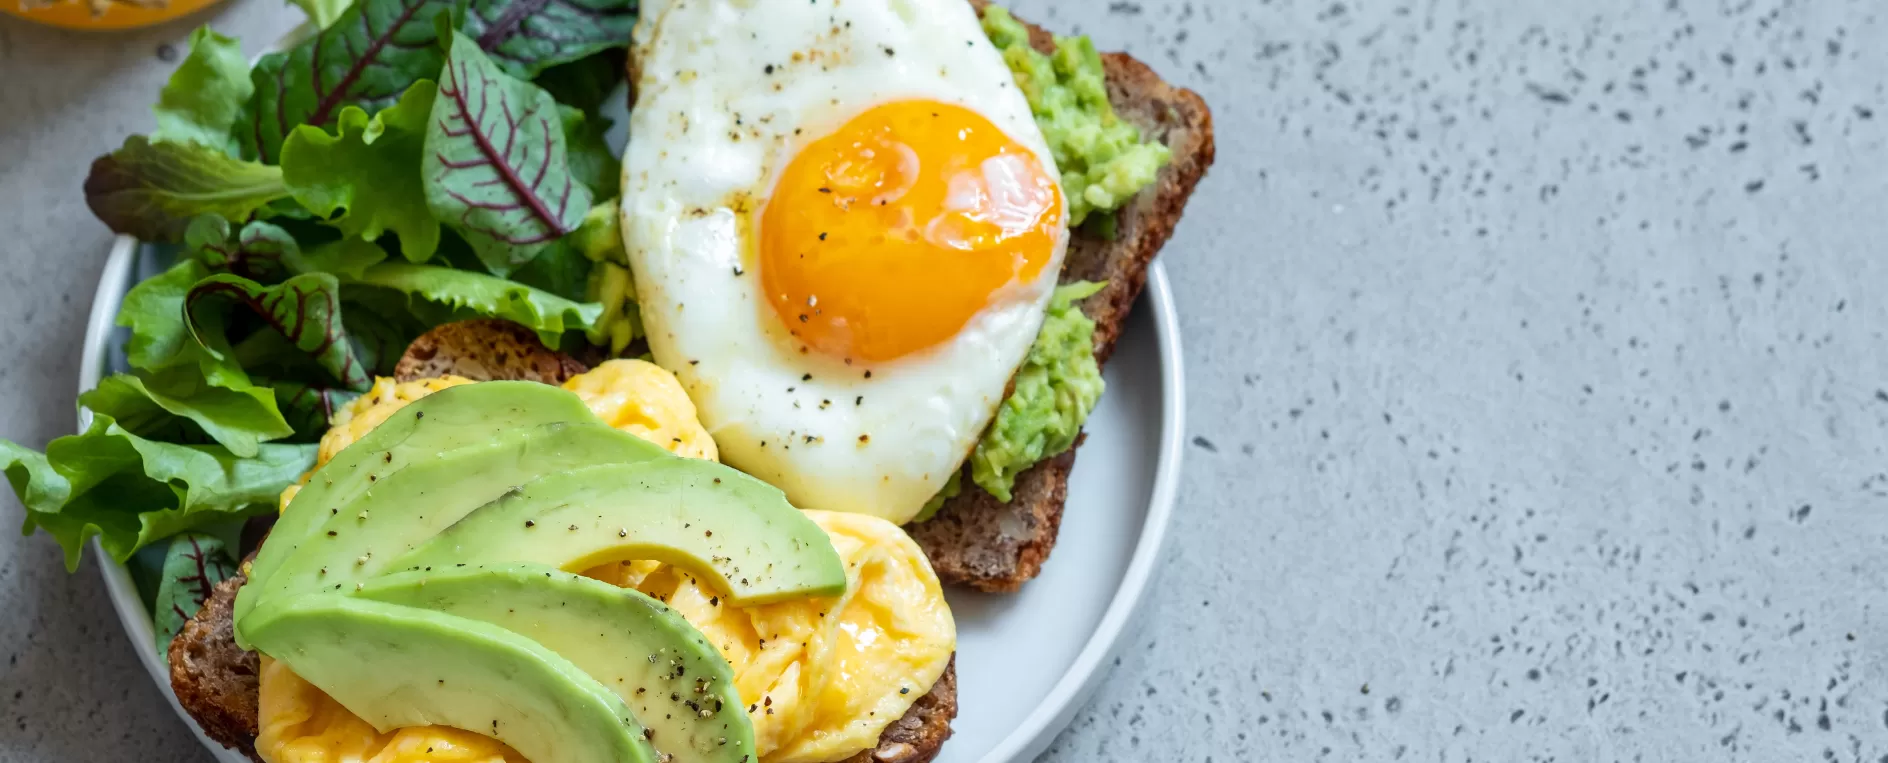 breakfast plate with eggs, avocado, and toast